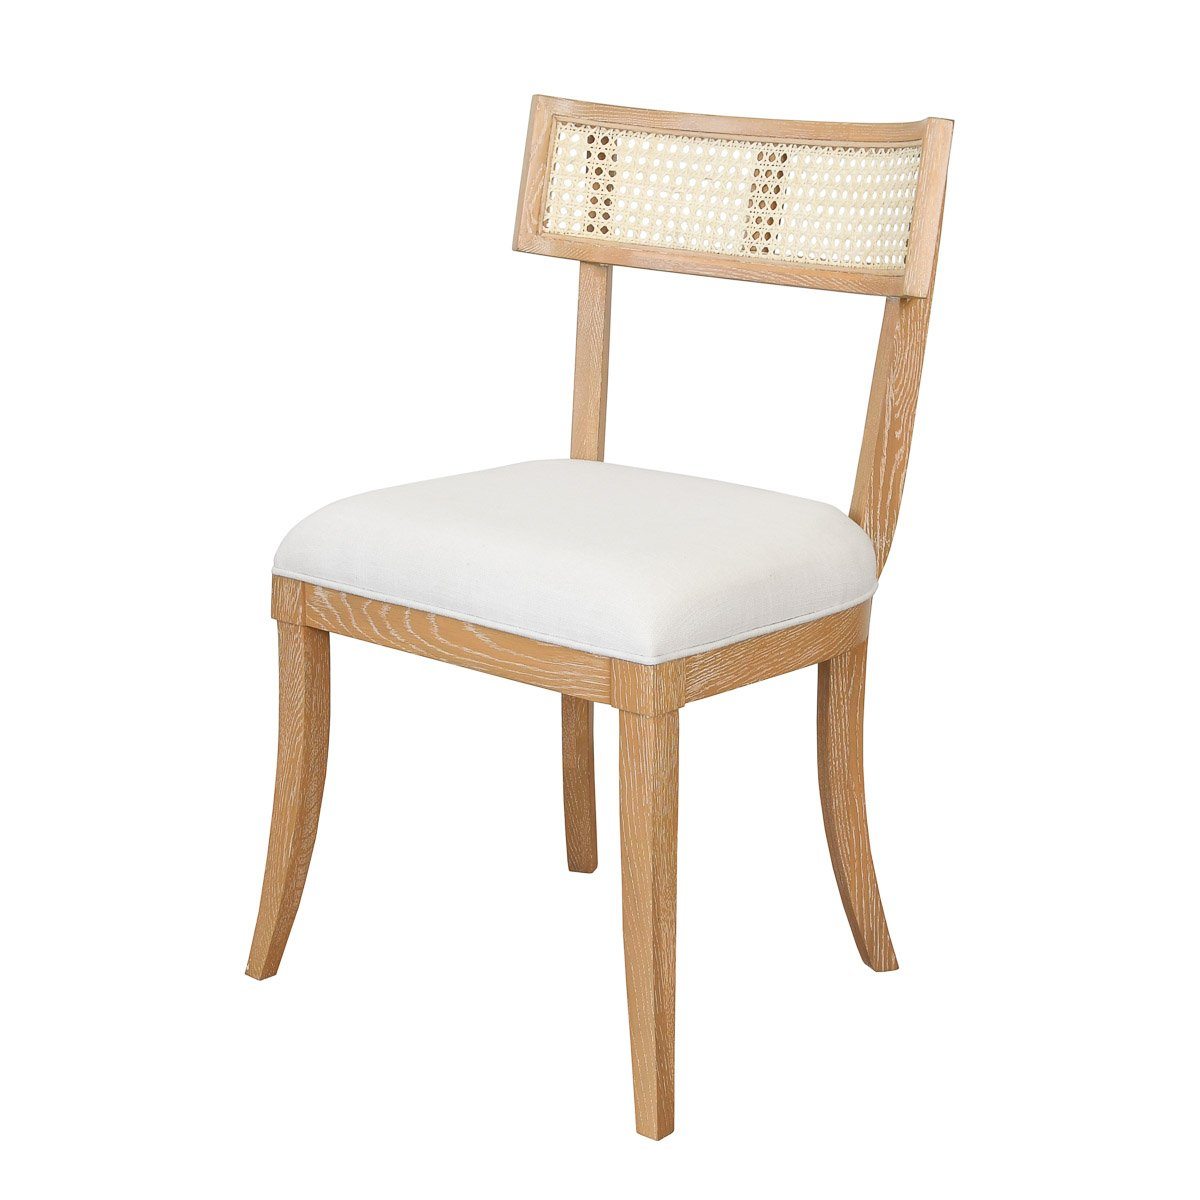 Violet Chair Cerused Oak | White Linen. Left angle view.